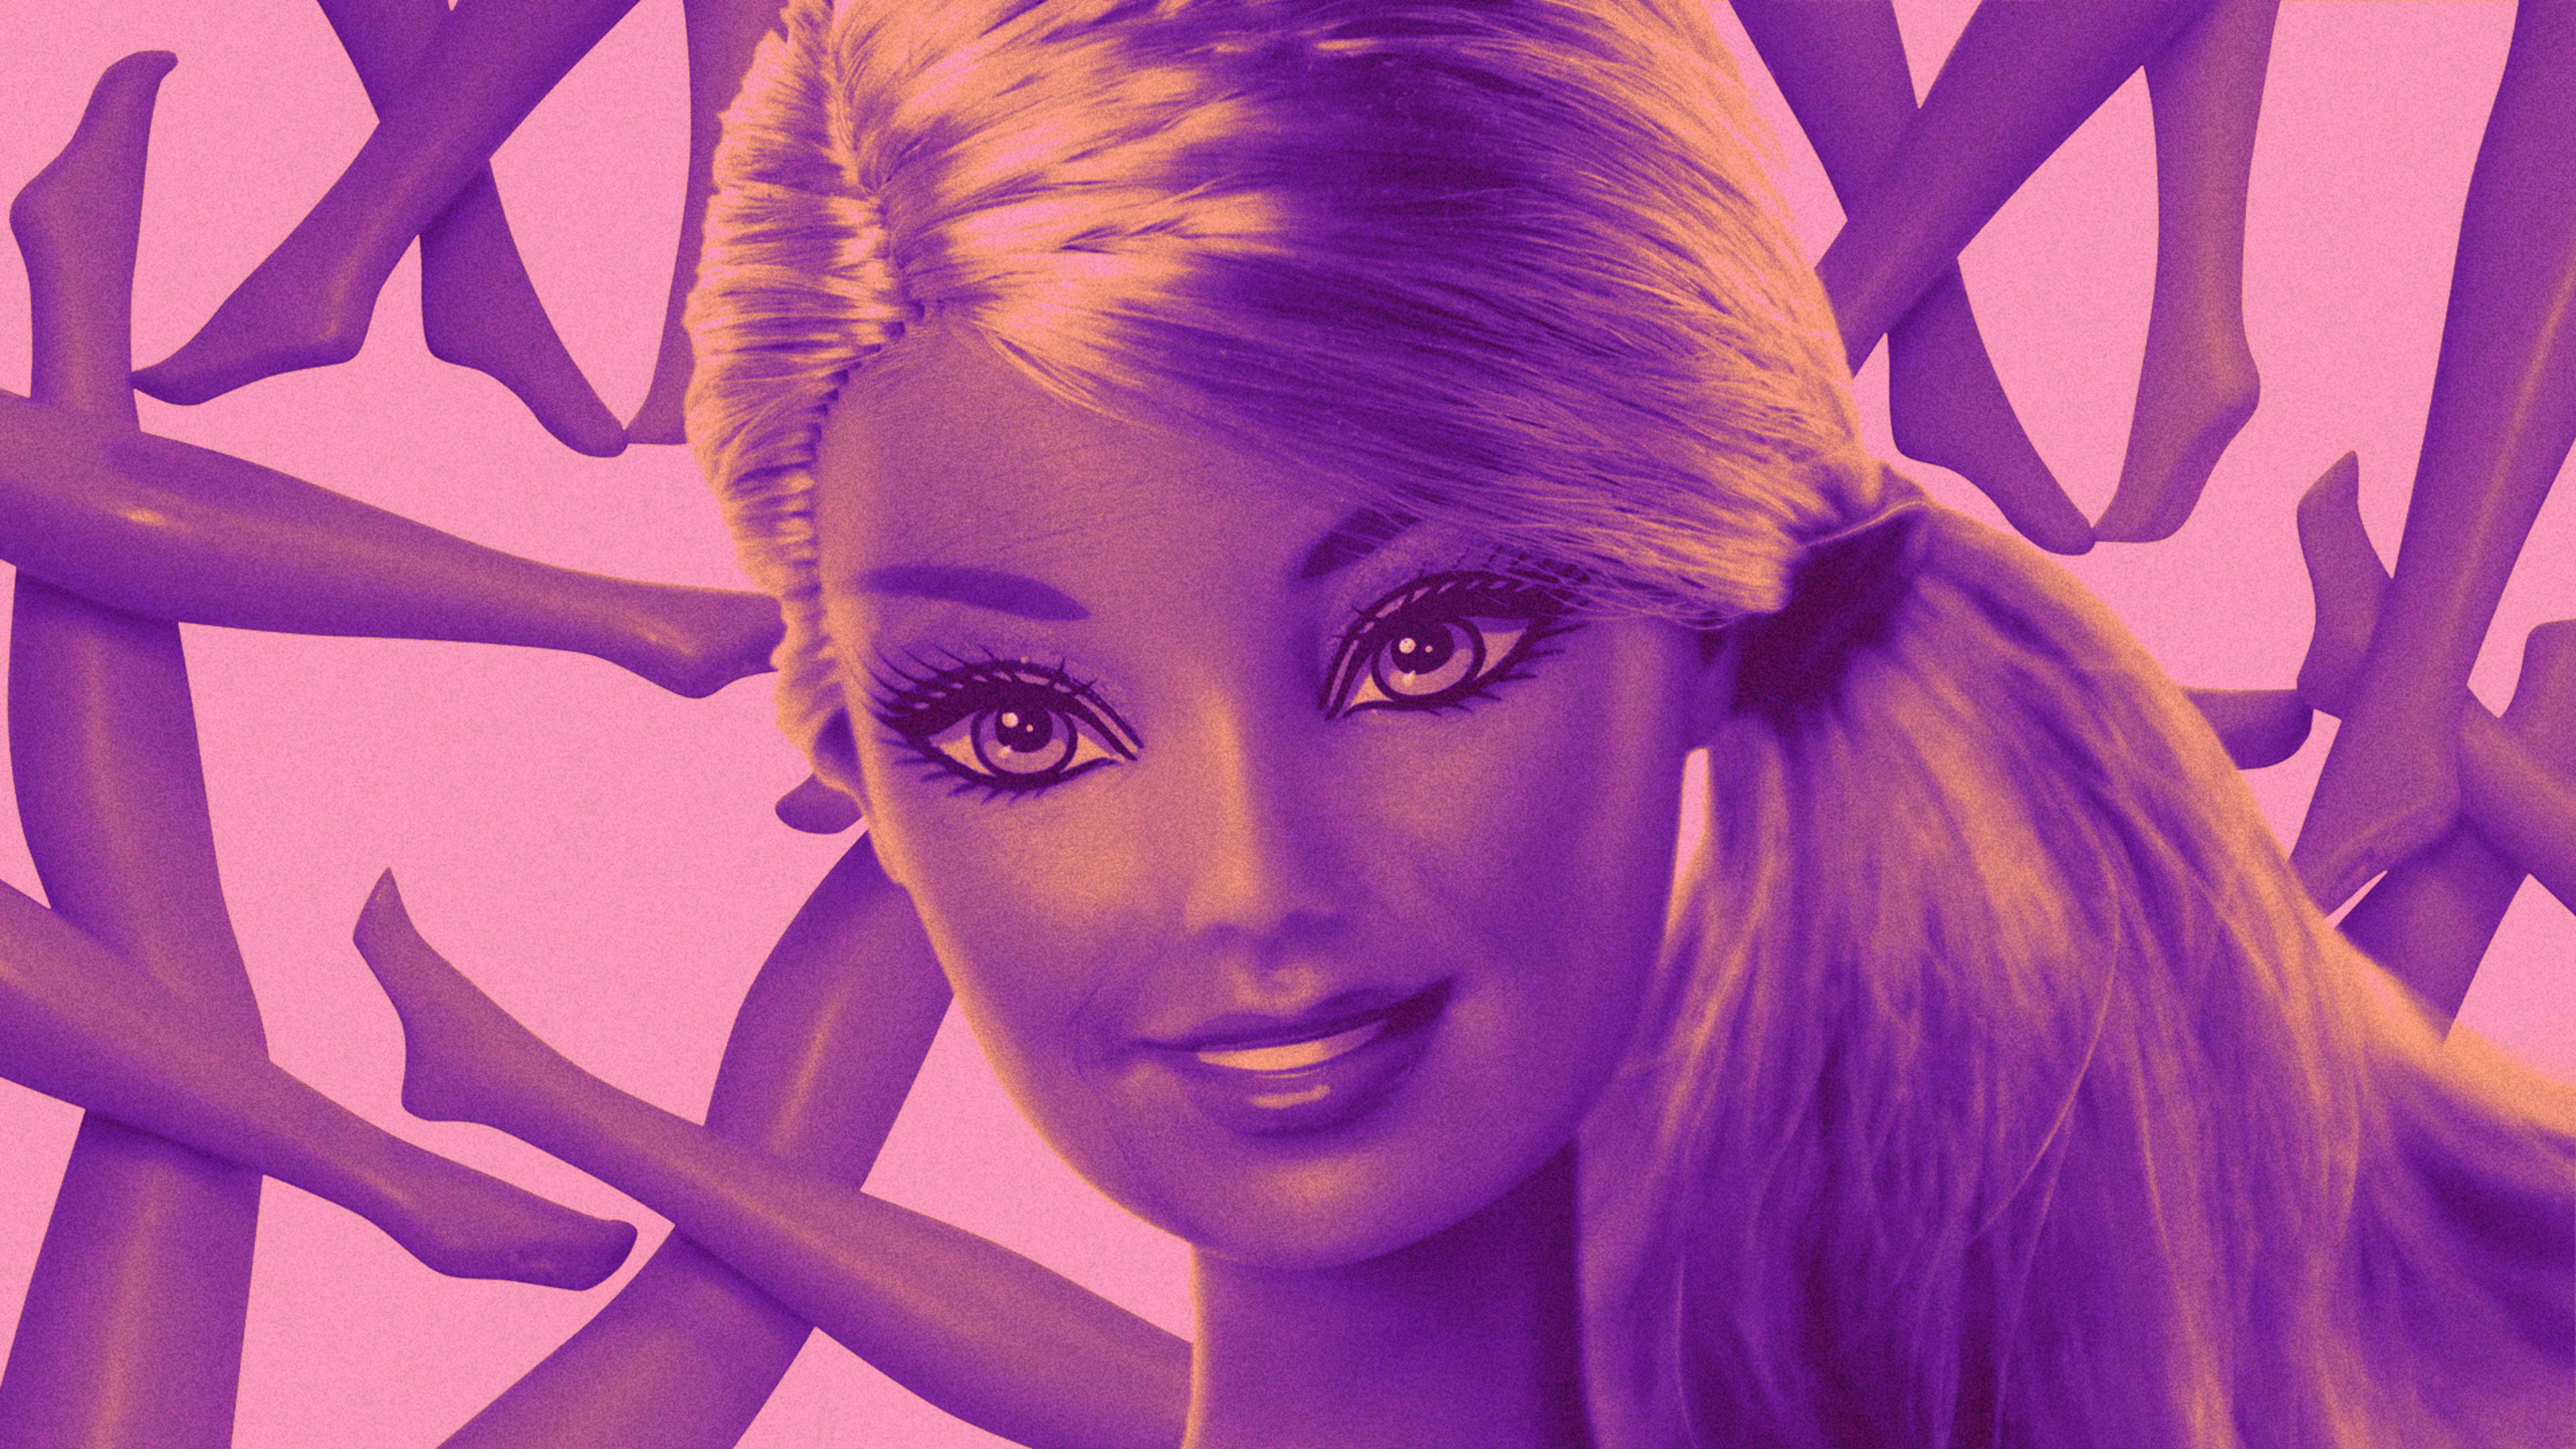 Is Barbie still relevant?